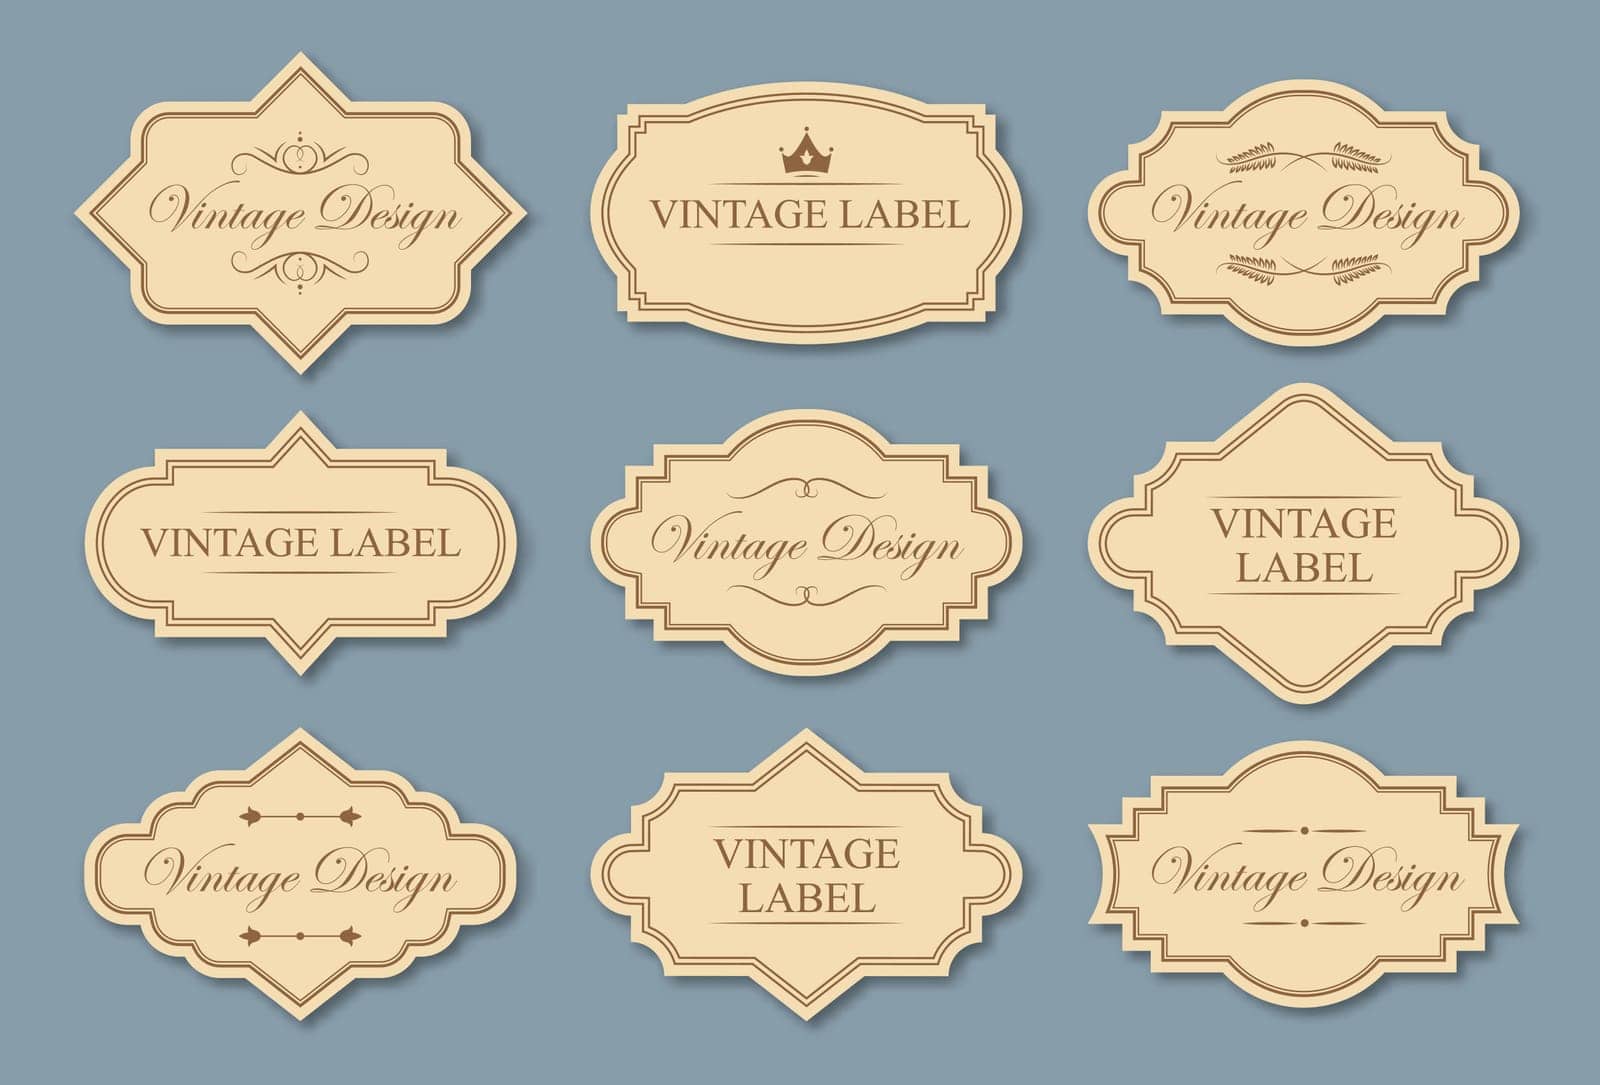 Retro craft labels set. Text samples in traditional frames, vintage tags with borders in Victorian style. Can be used for wedding invitation card design, badges and logos templates